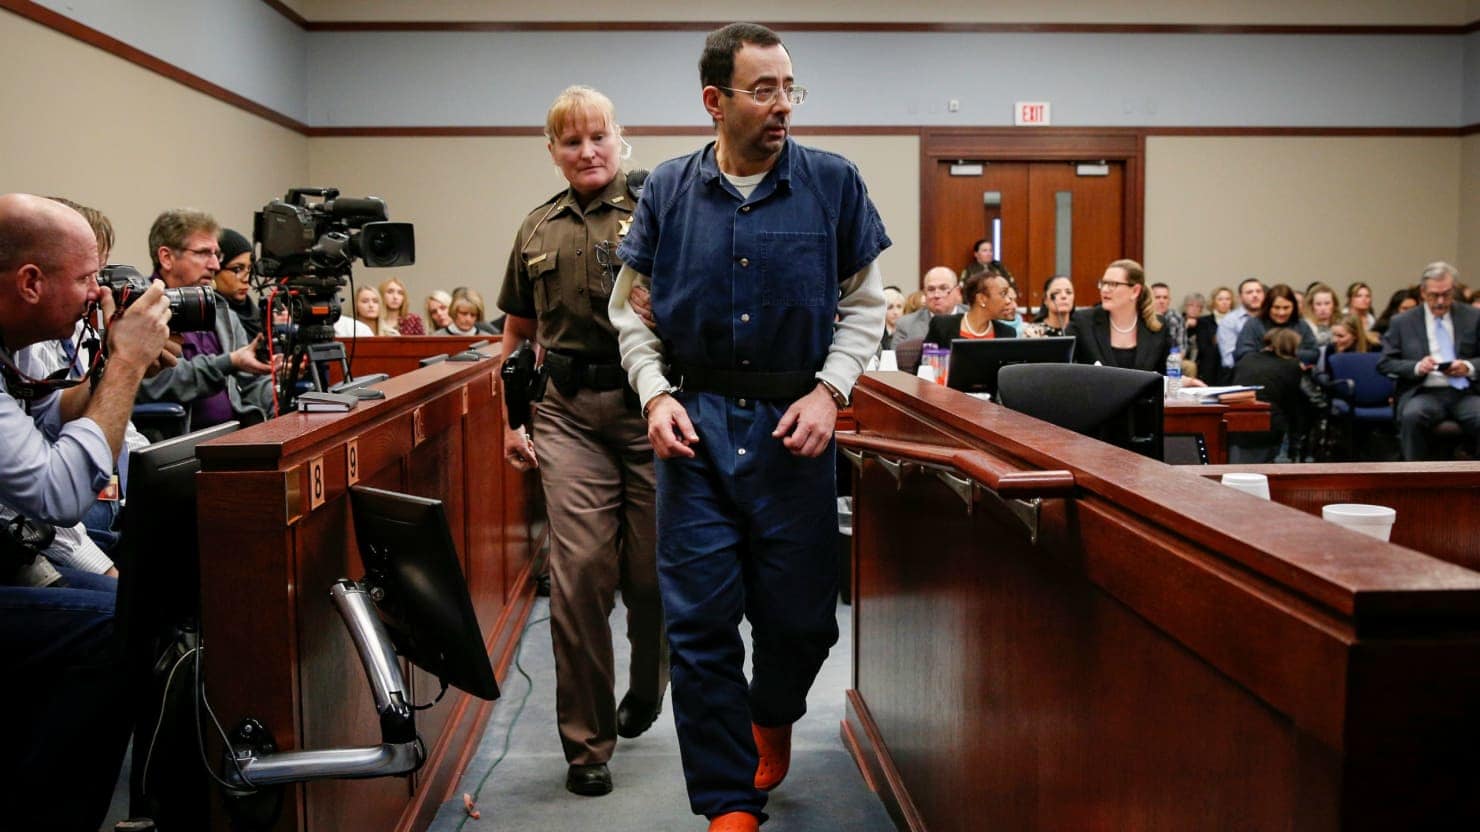 A Male Gymnast Has Accused Larry Nassar of Sexual Abuse